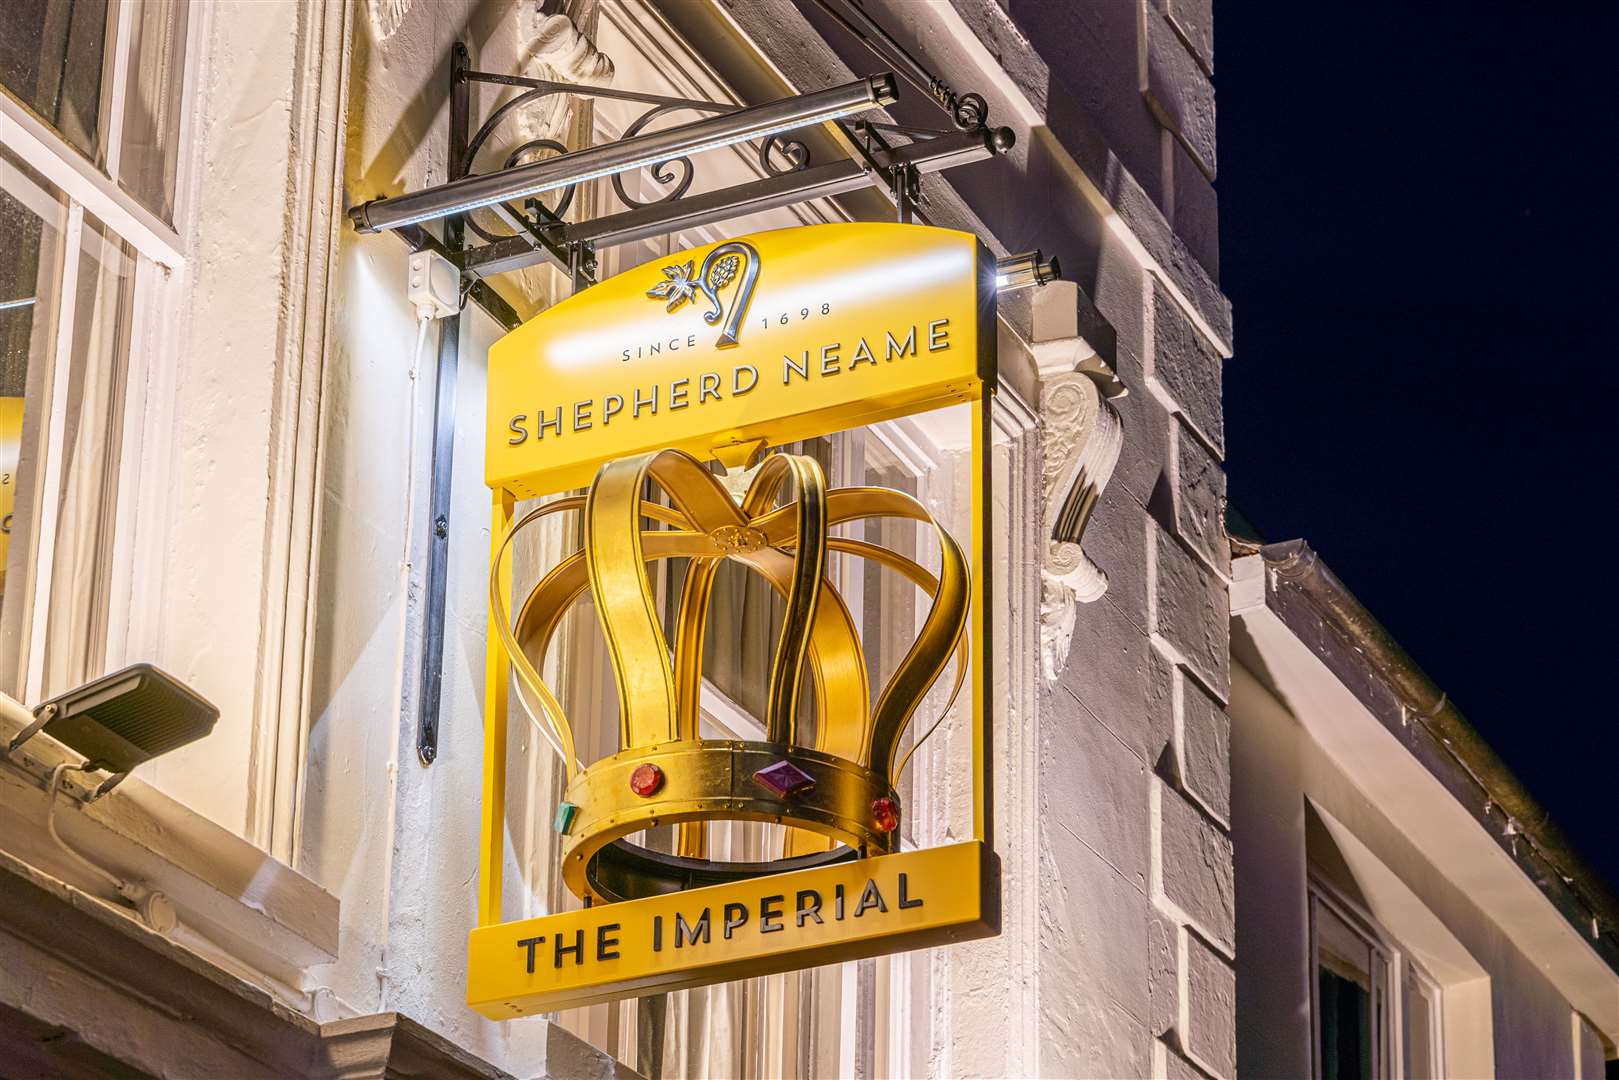 The pub and beer firm has seen revenues bounce back. Picture: Shepherd Neame/Frankie Julian